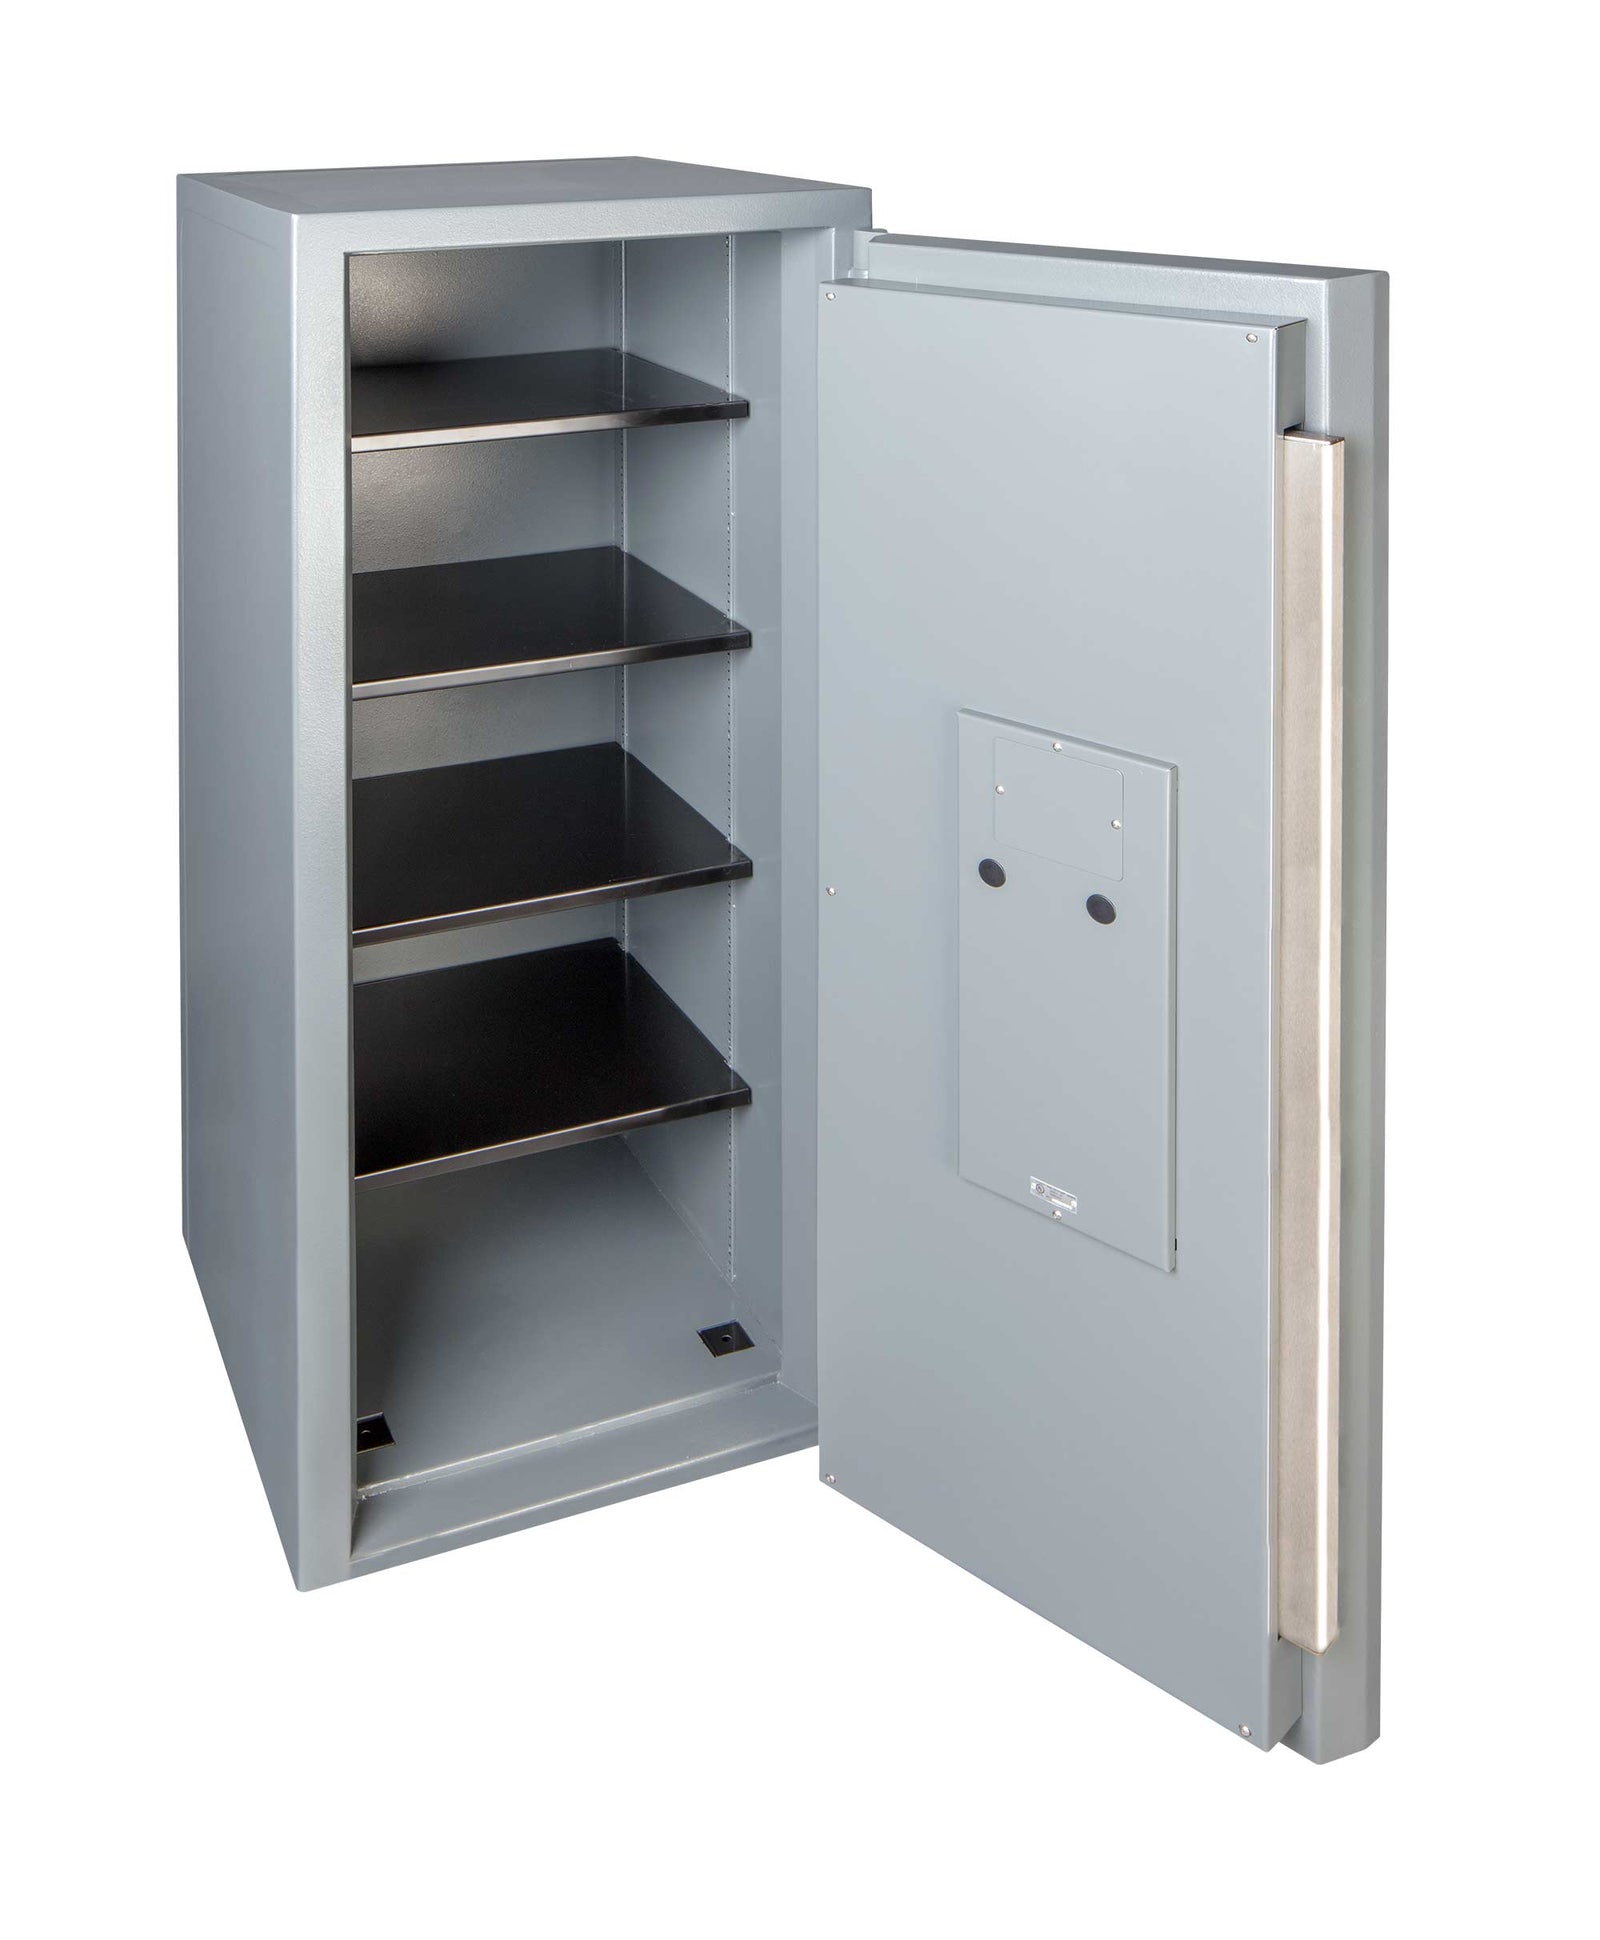 Gardall TL30-7236 TL-30 Commercial High Security Safe